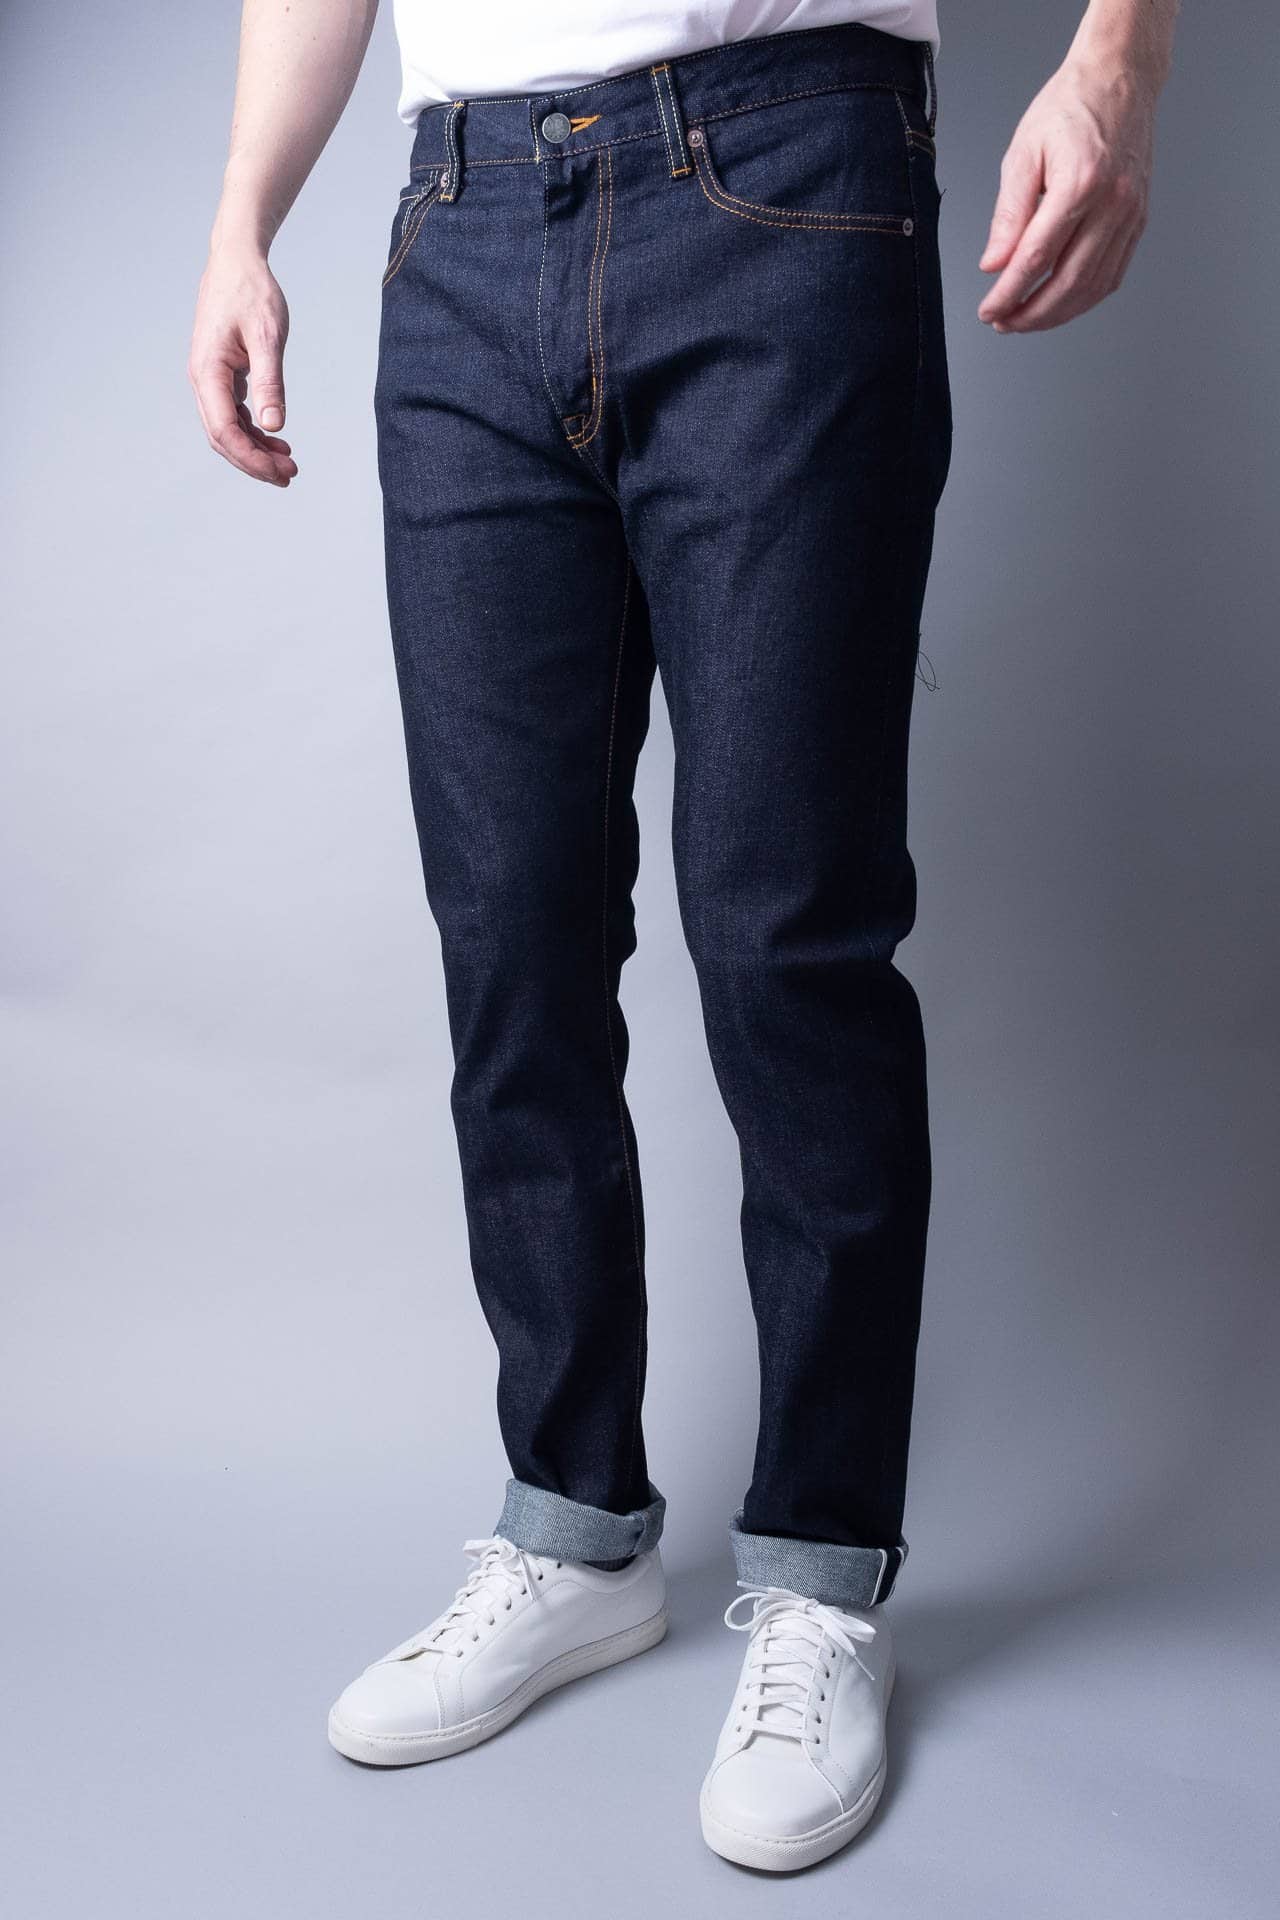 Japanese Selvage Denim - once a day